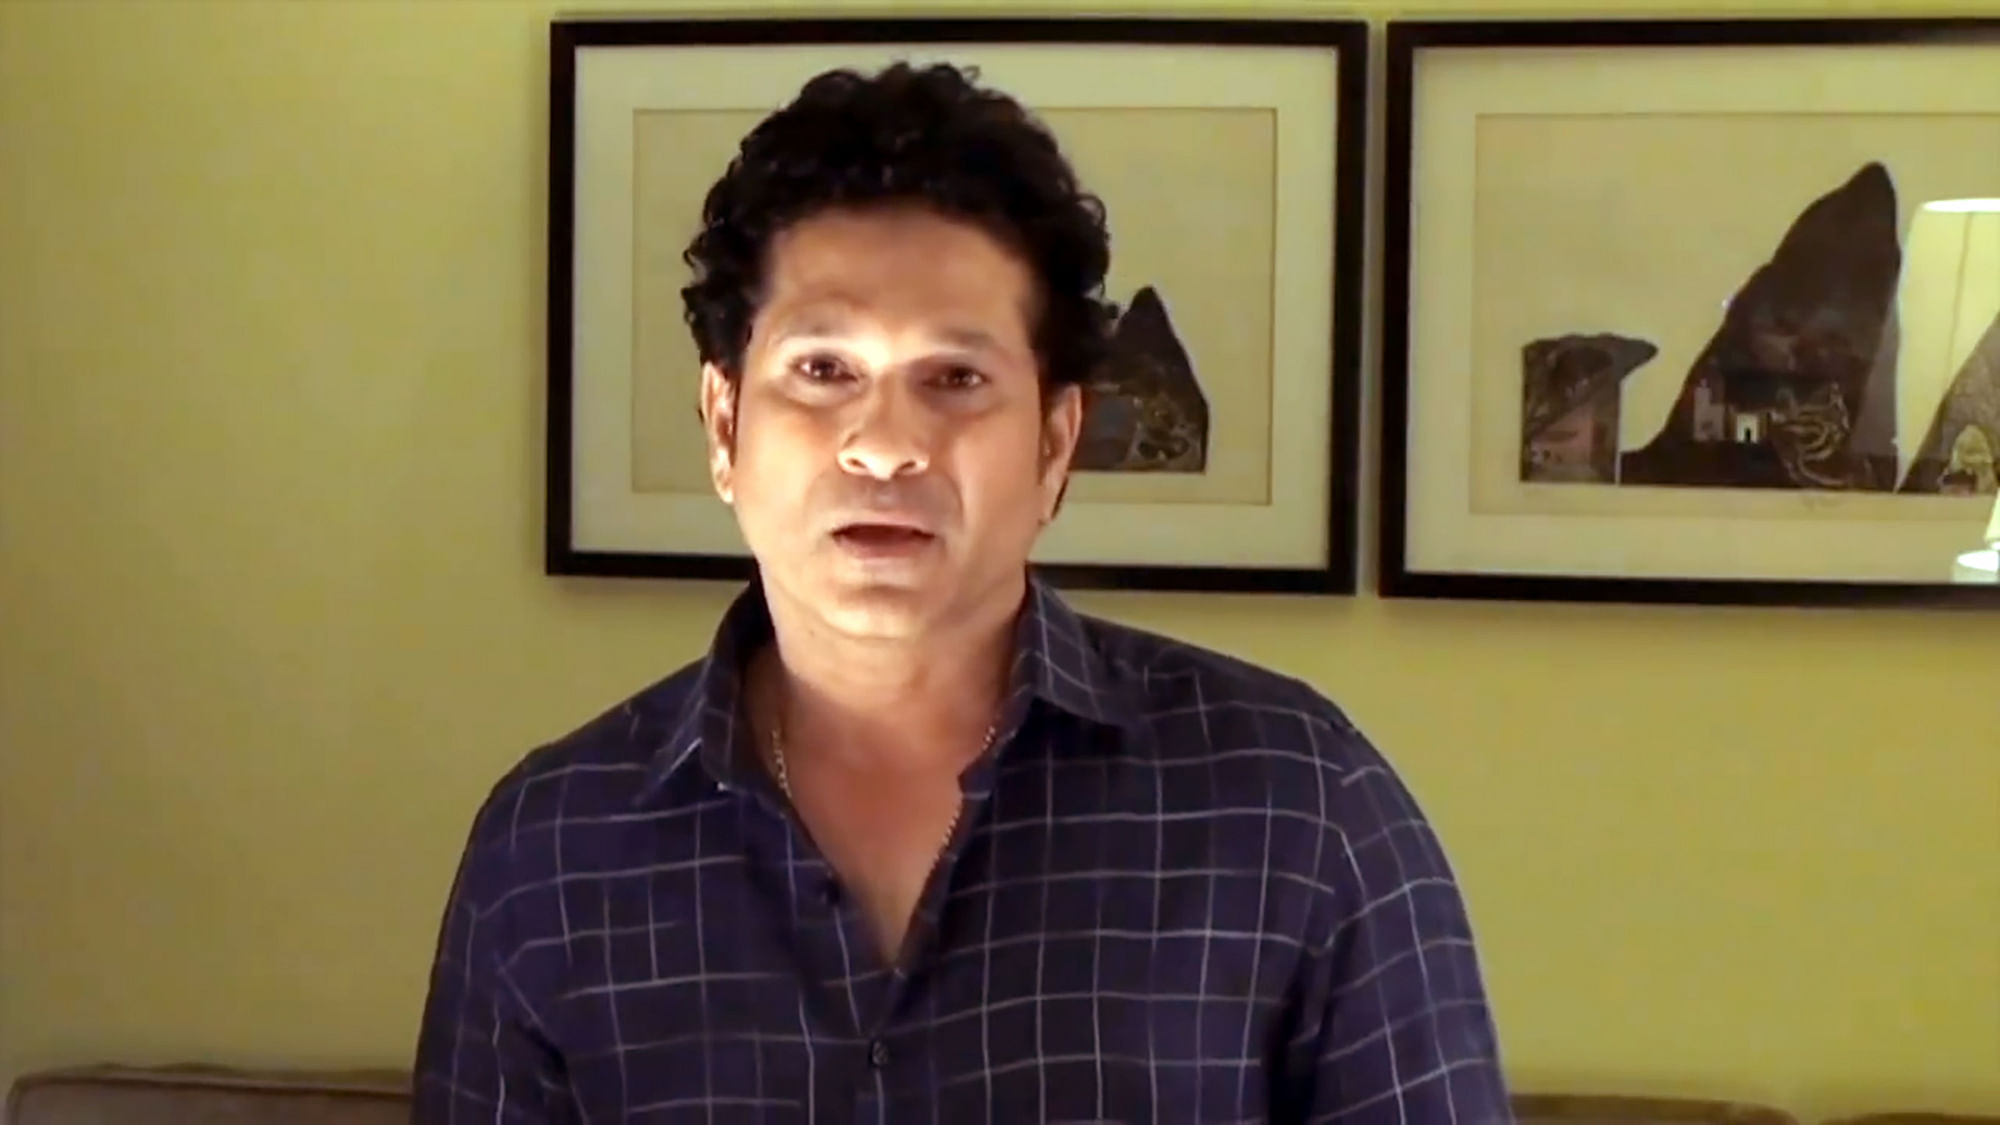 A screengrab of Sachin’s video on Facebook.